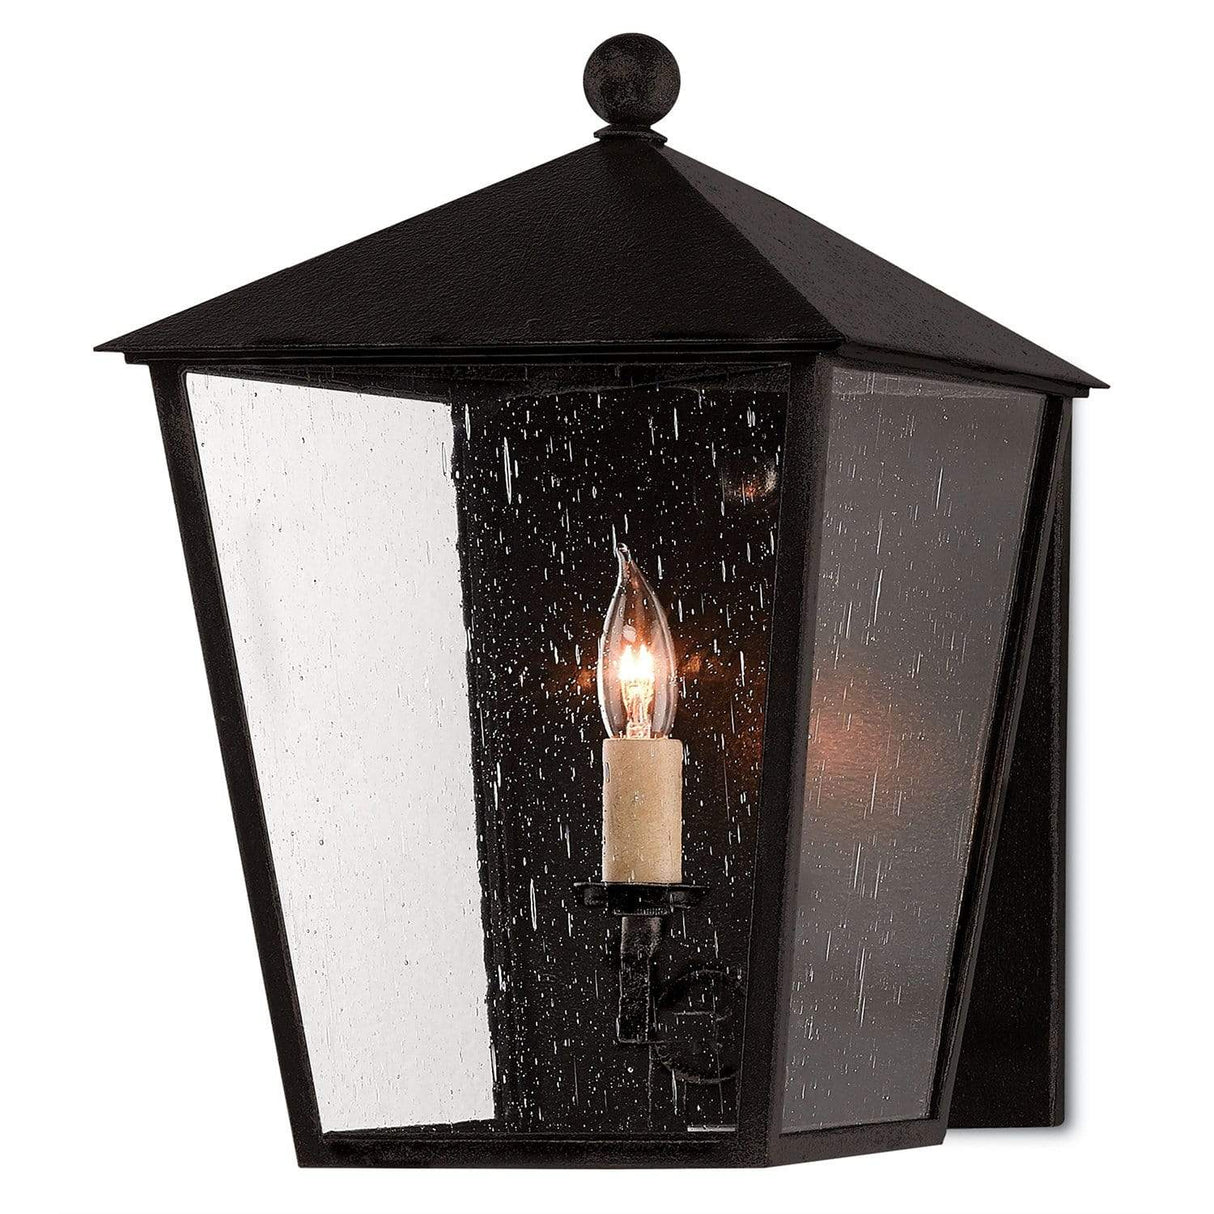 Currey and Company Bening Outdoor Wall Sconce Lighting currey-co-5500-0012